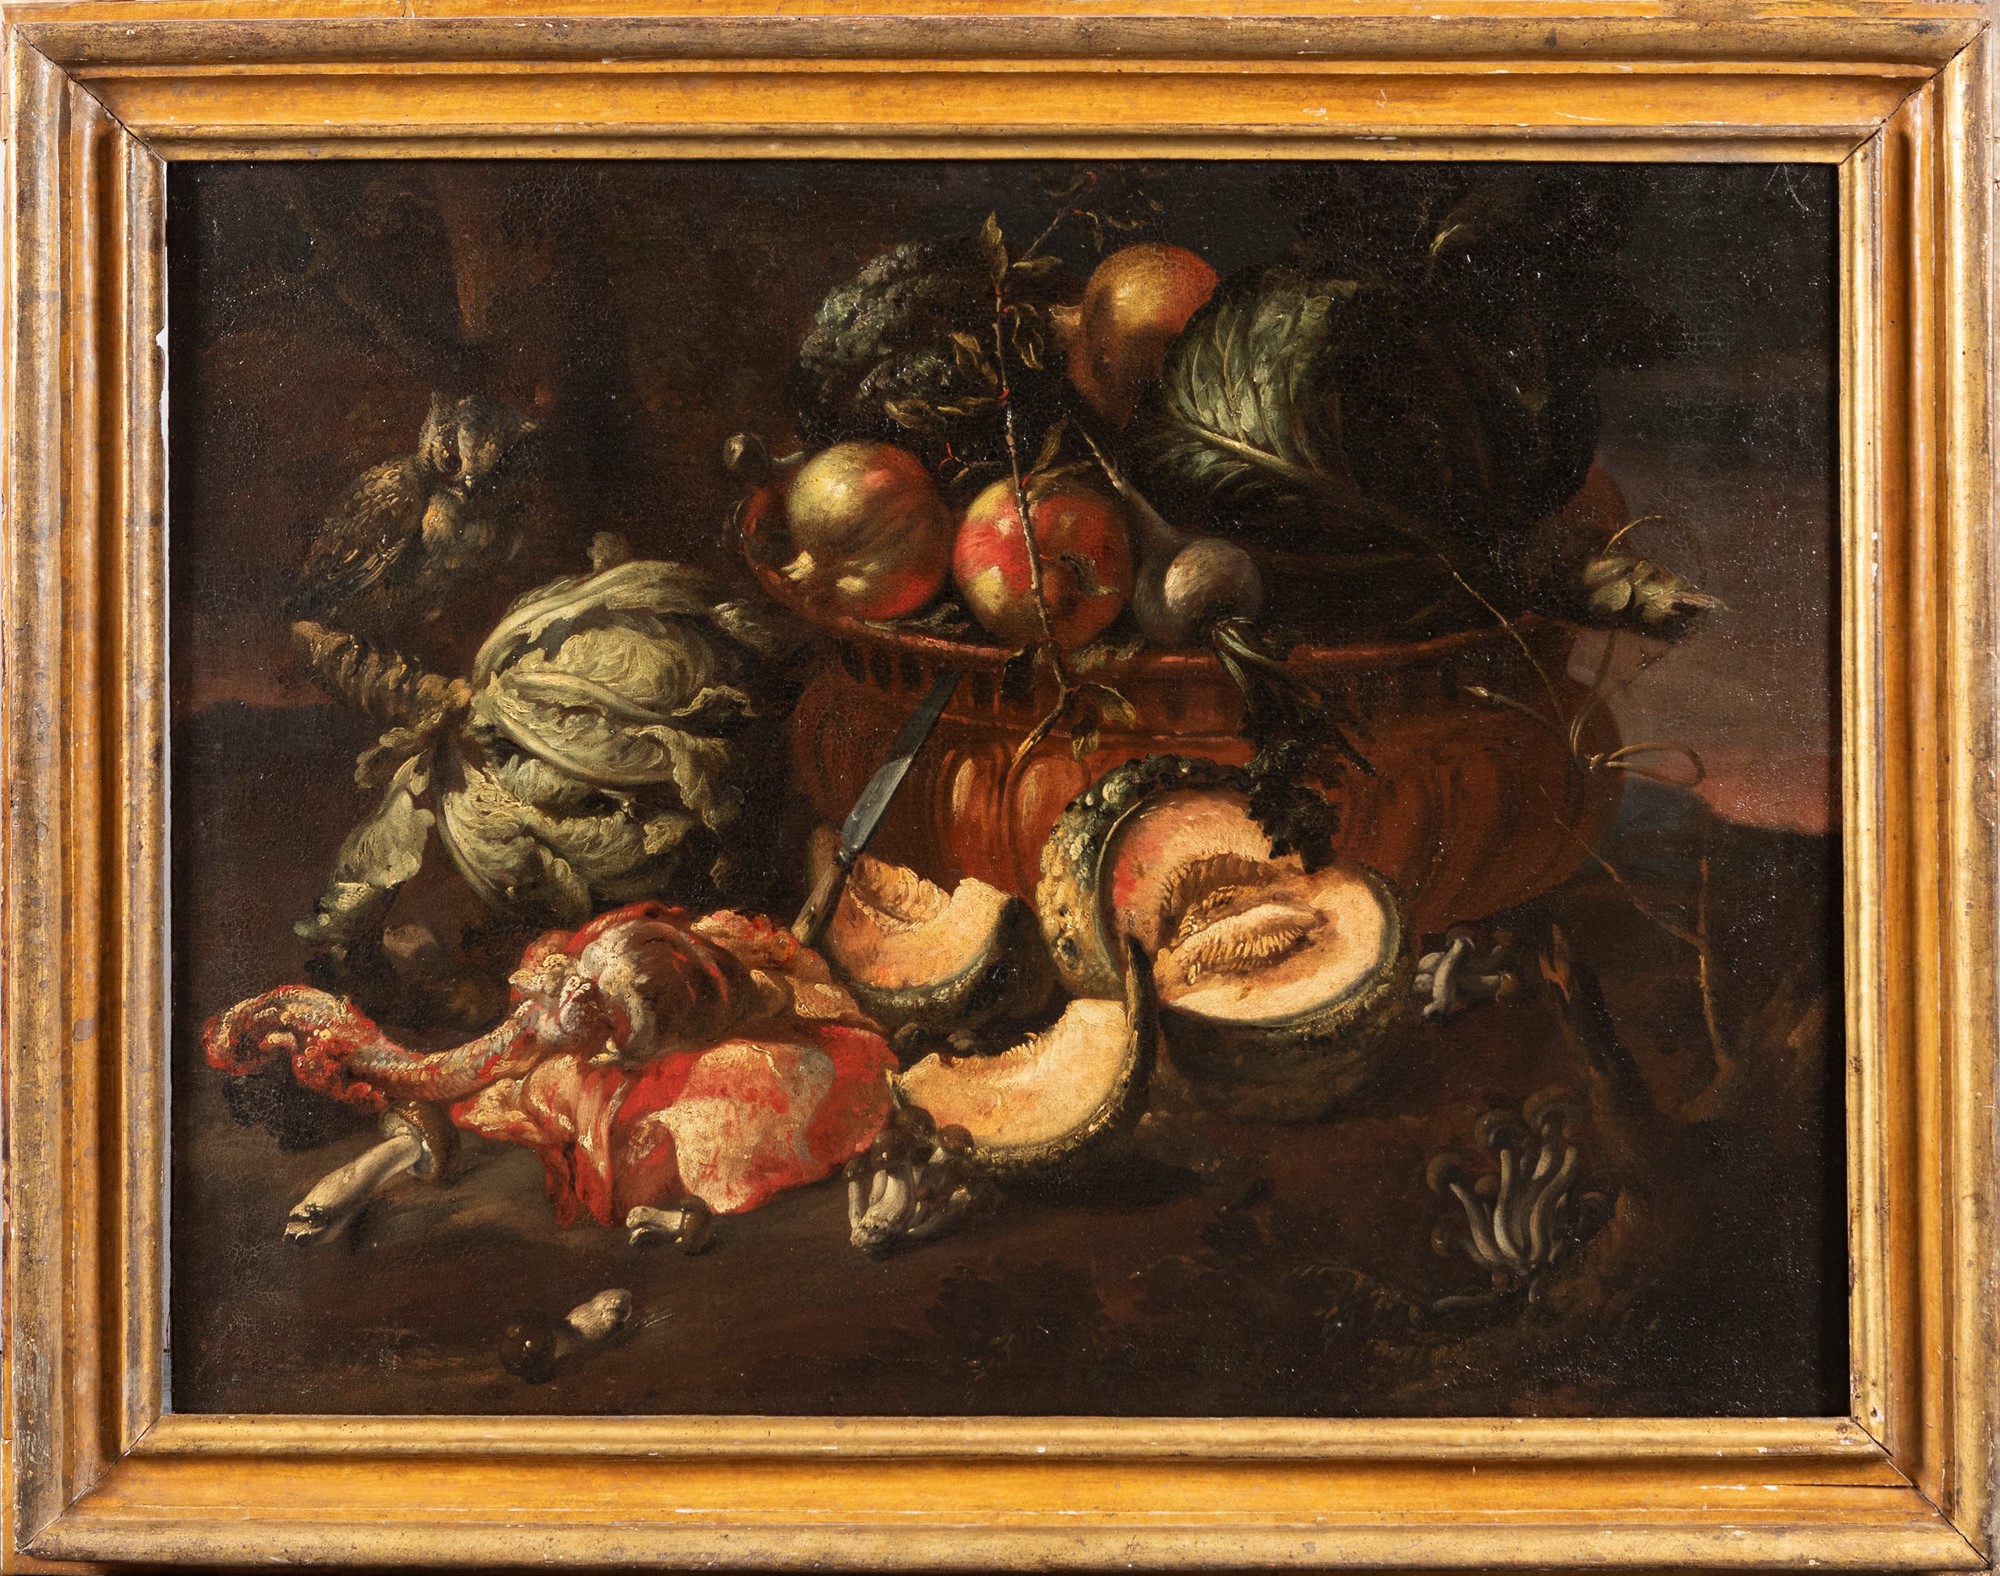 Felice Boselli (Piacenza 1650-Parma 1732) - Entrails, vegetables and fruits with a owl - Image 2 of 7